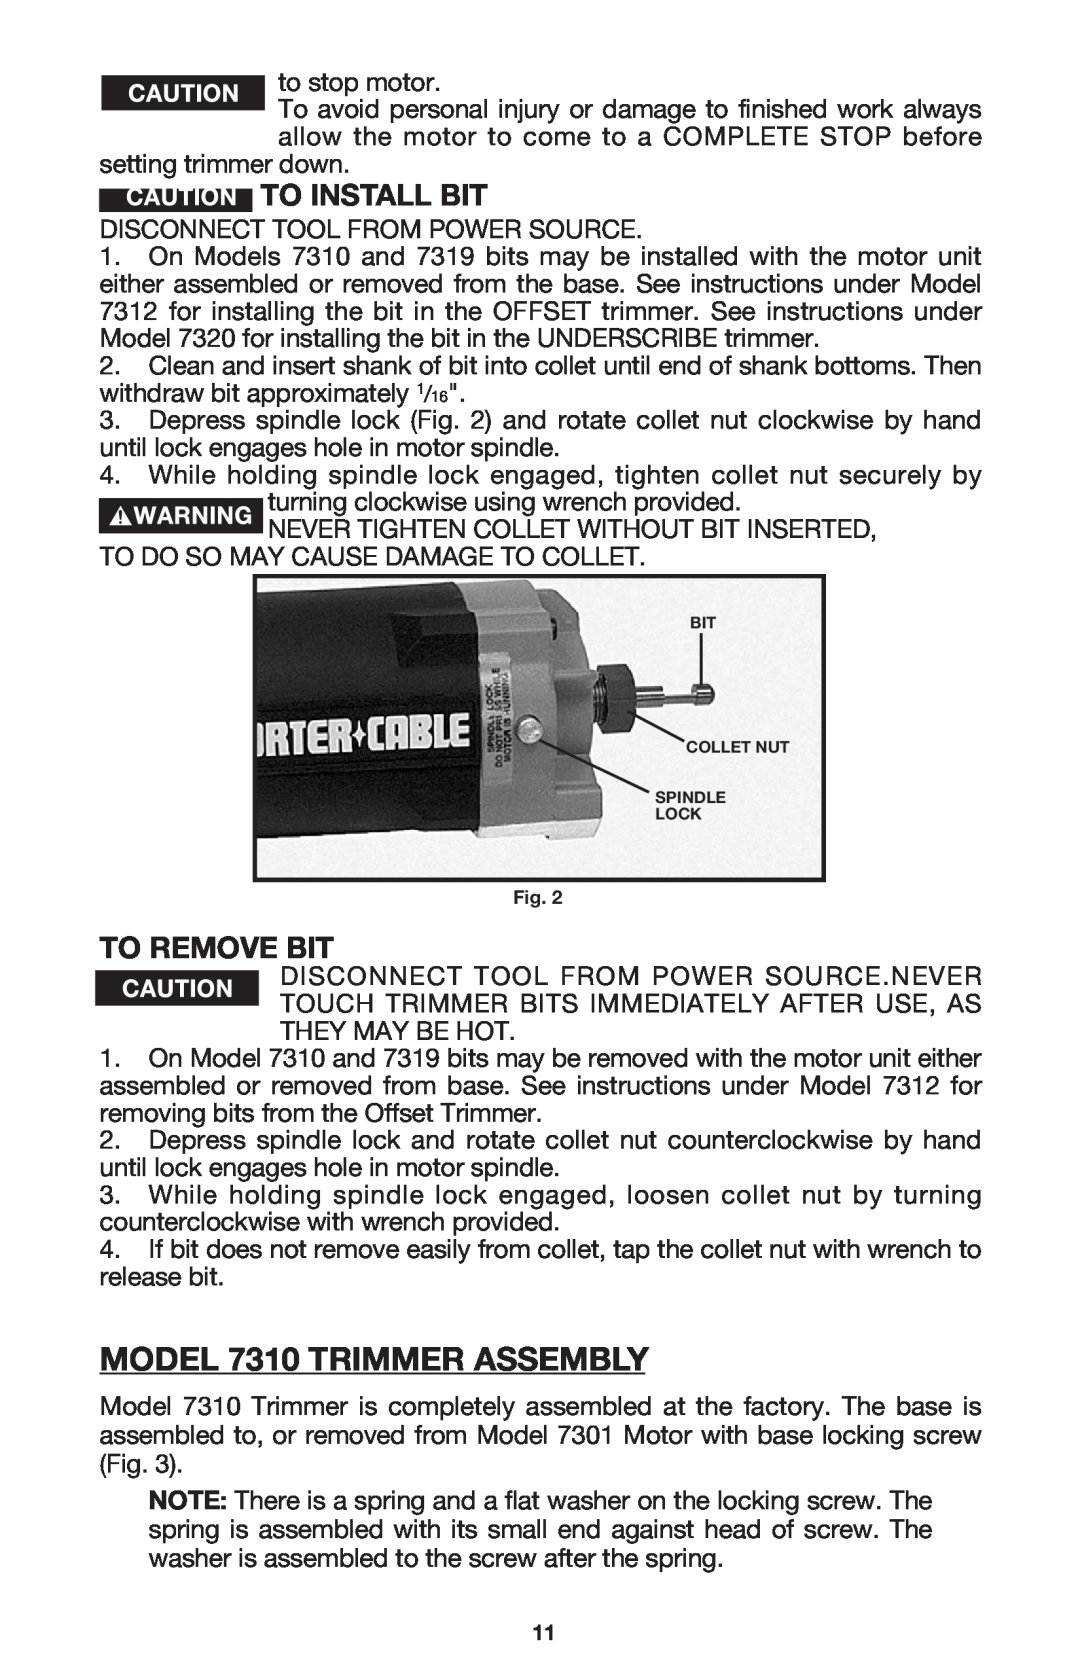 Porter-Cable instruction manual MODEL 7310 TRIMMER ASSEMBLY, To Install Bit, To Remove Bit 